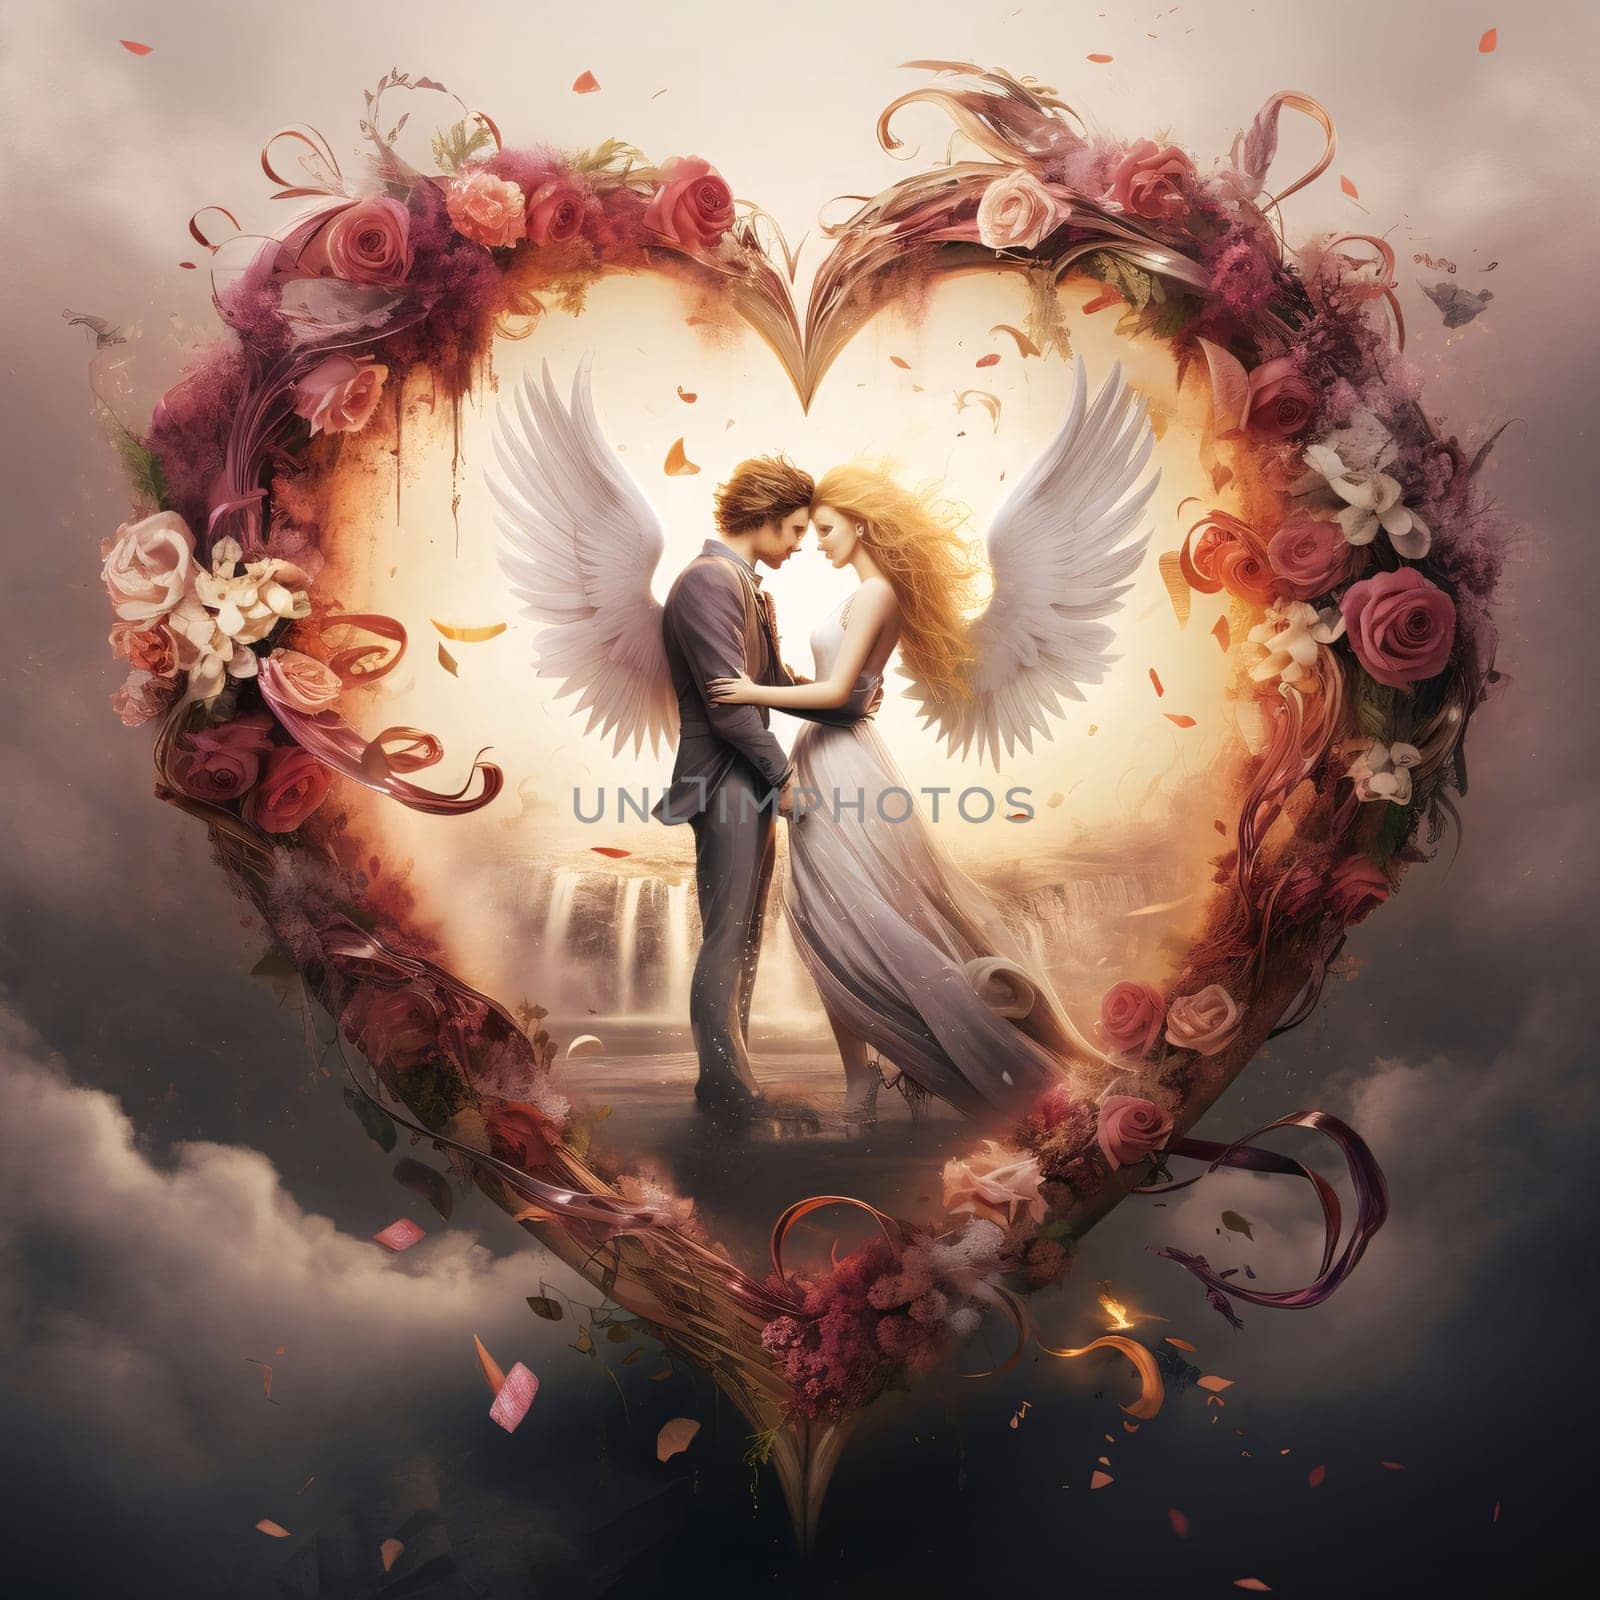 A couple in love with angel wings in a heart with a wreath of flowers. Heart as a symbol of affection and love. The time of falling in love and love.